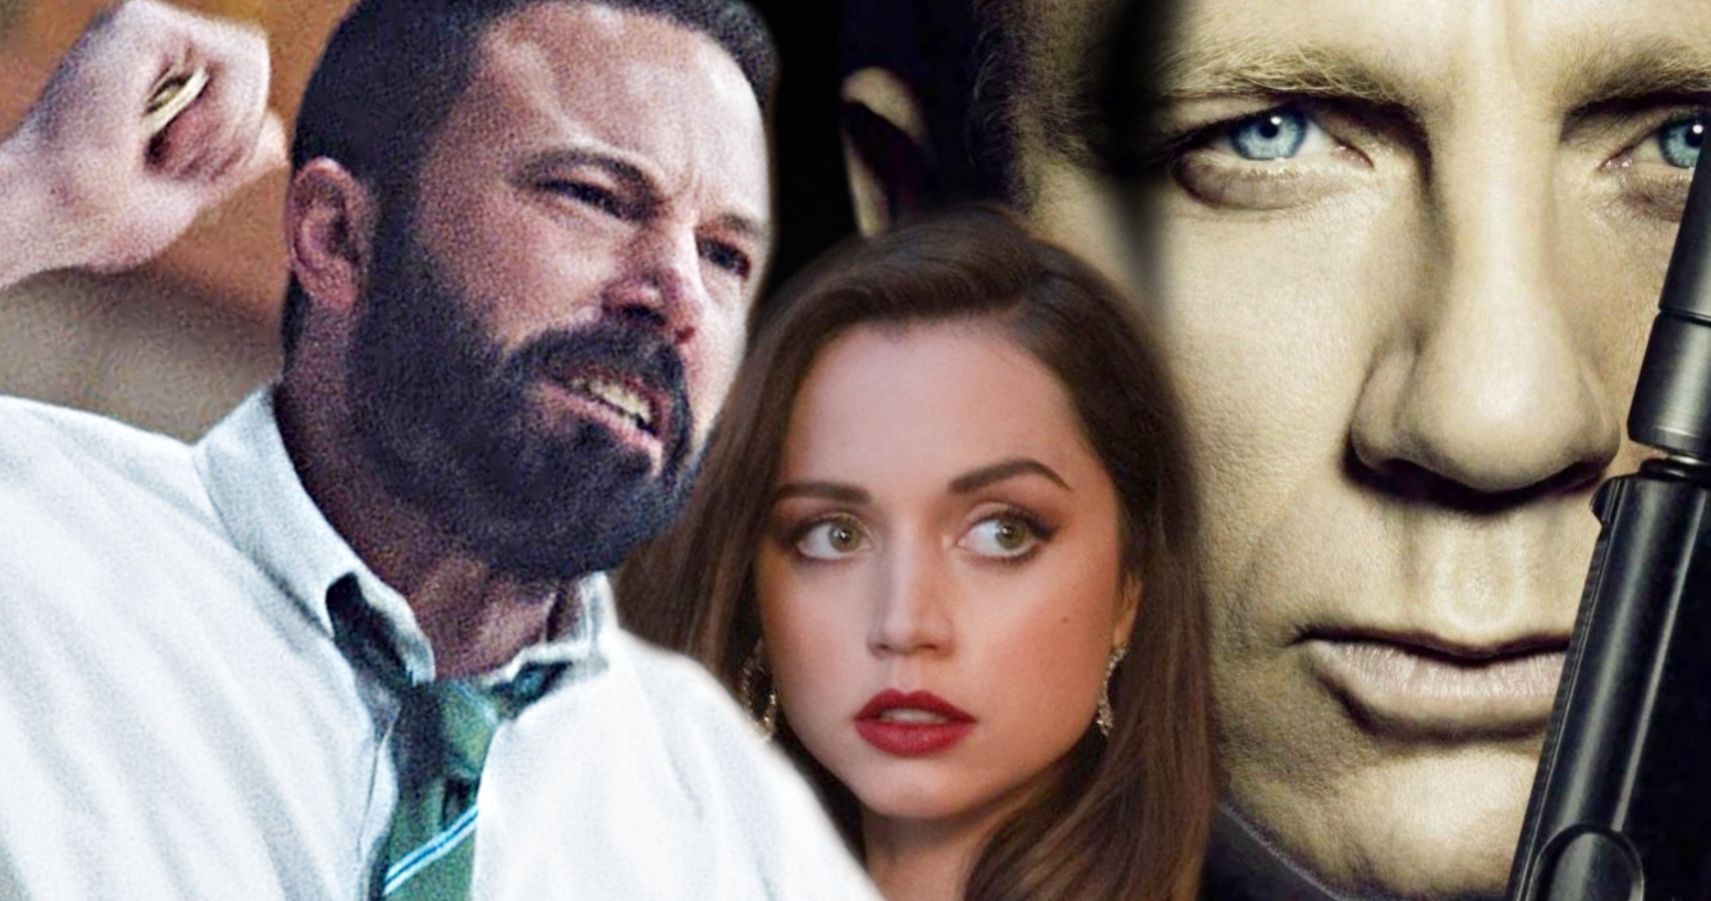 James Bond Rumor Claims Ben Affleck Is Banned from No Time to Die Premiere